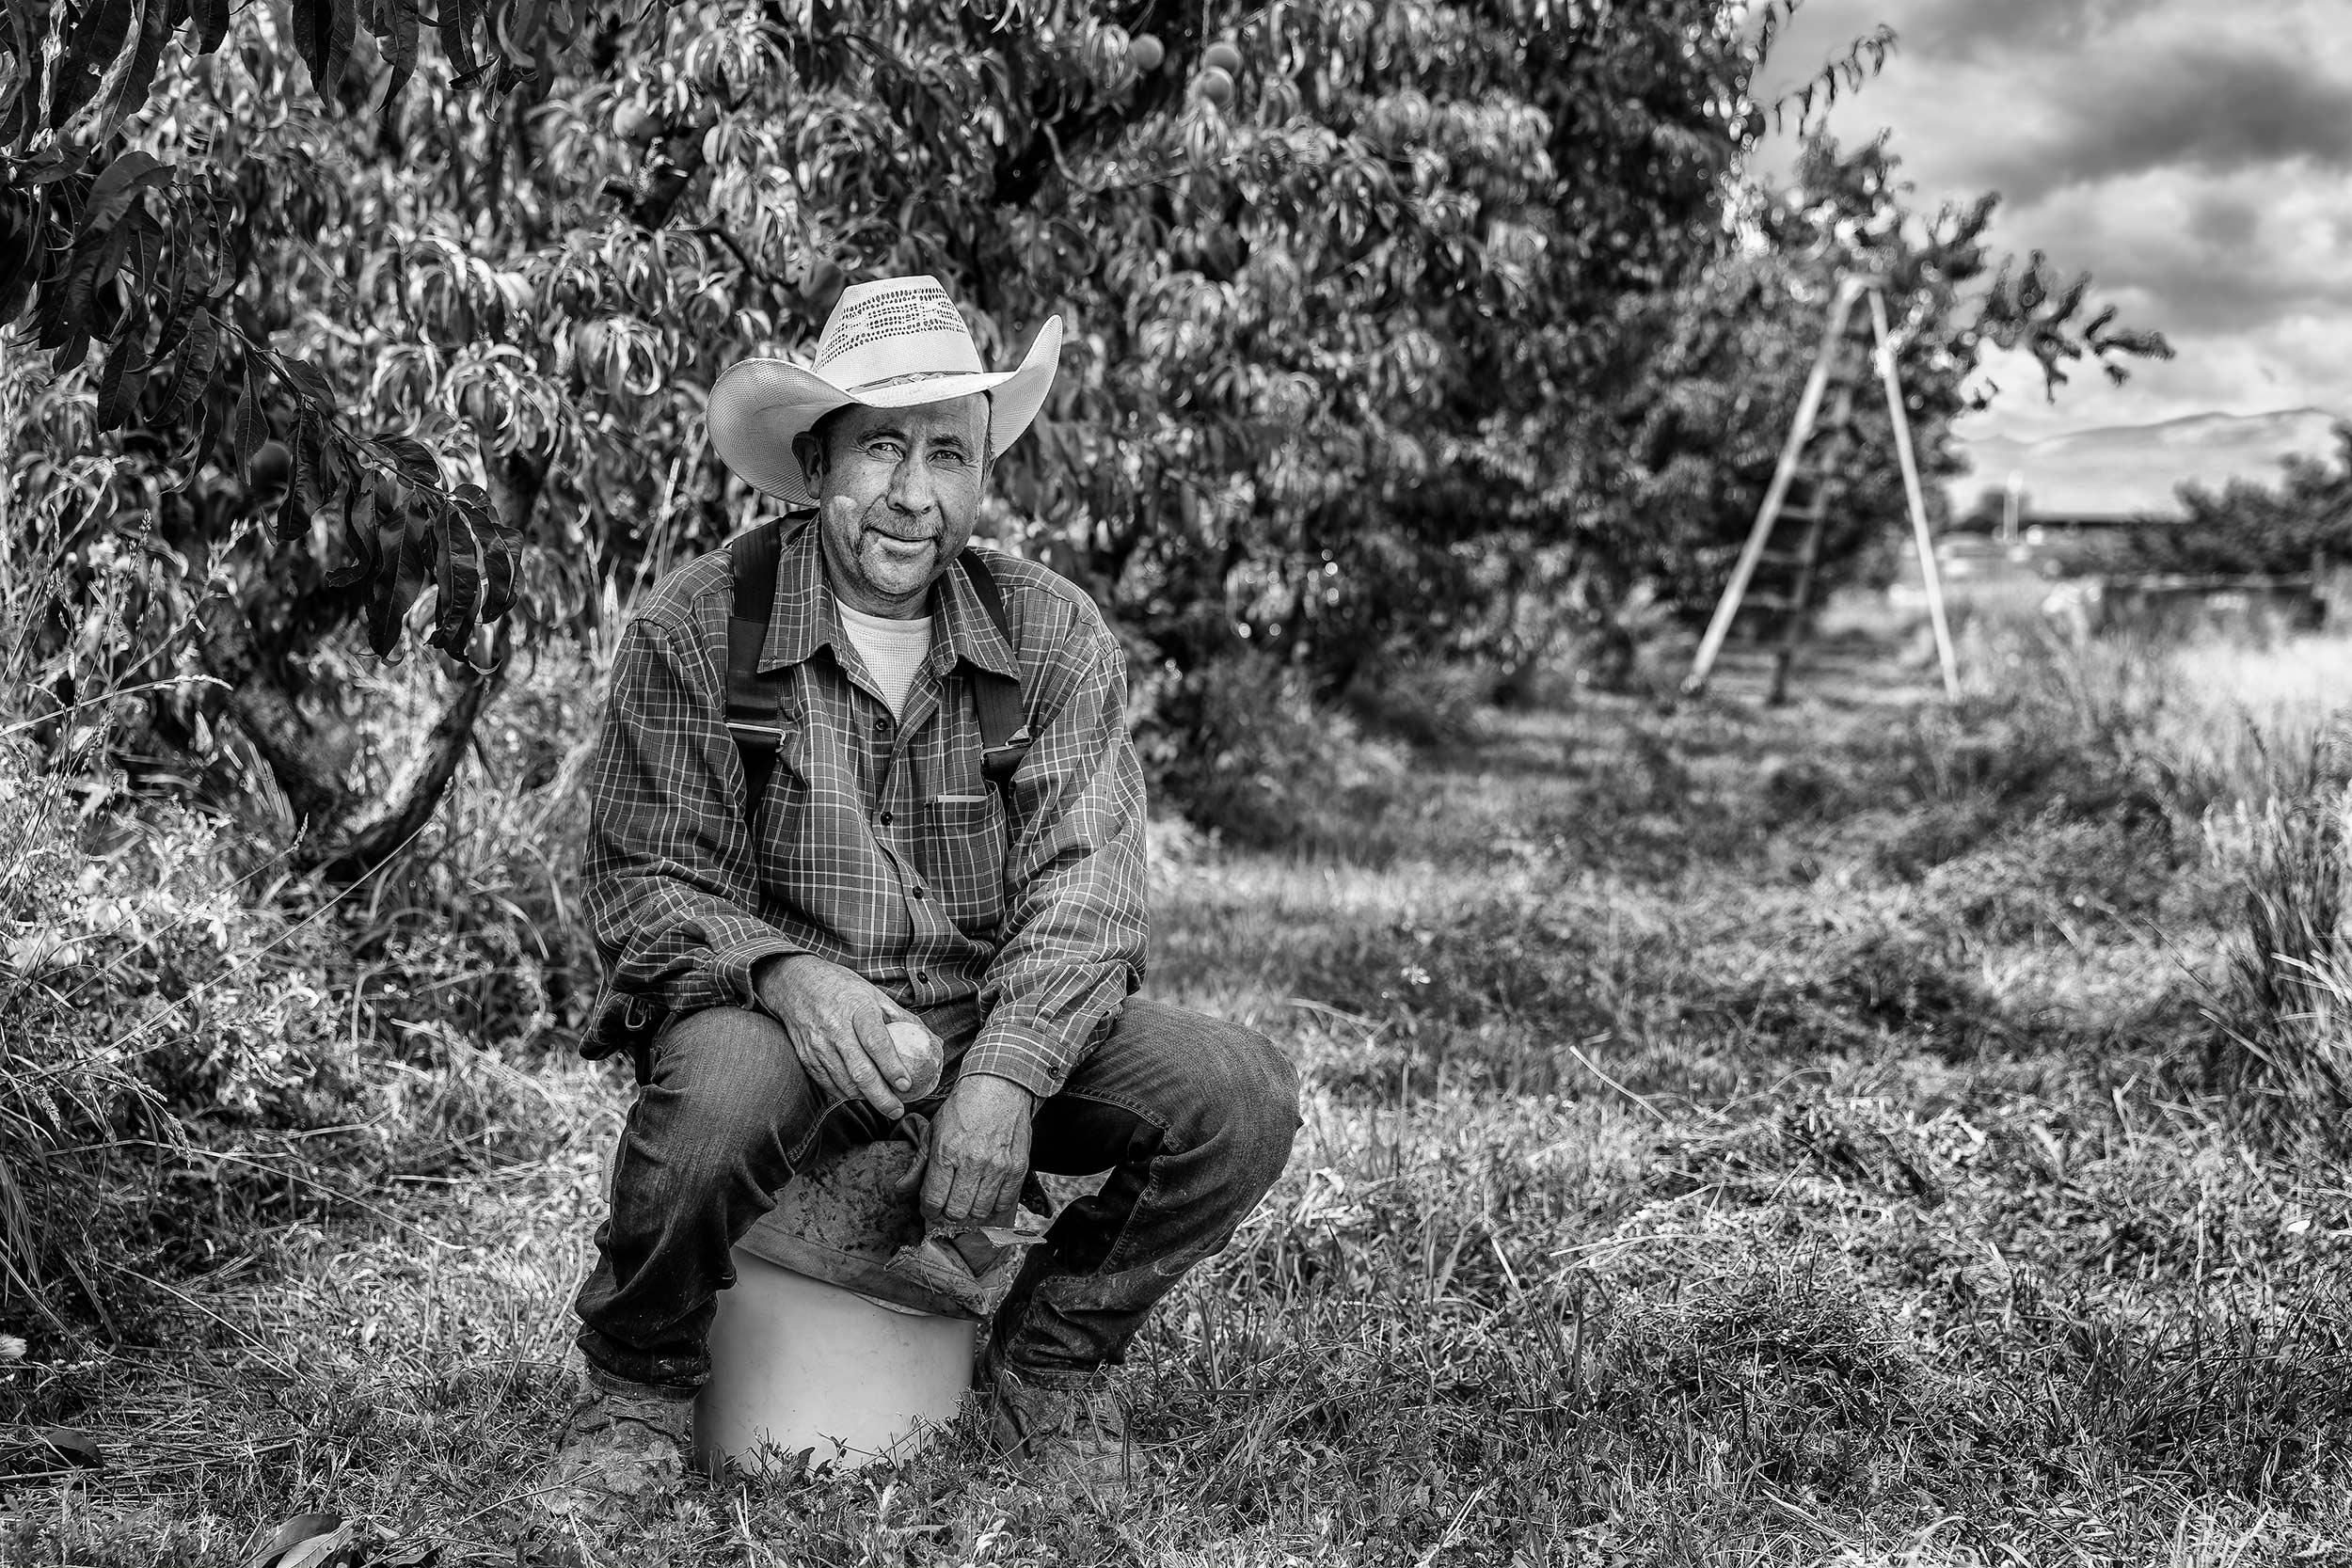 Black and white portrait of a crop worker sitting on a bucket holding a peach in an orchard. Agriculture Photography